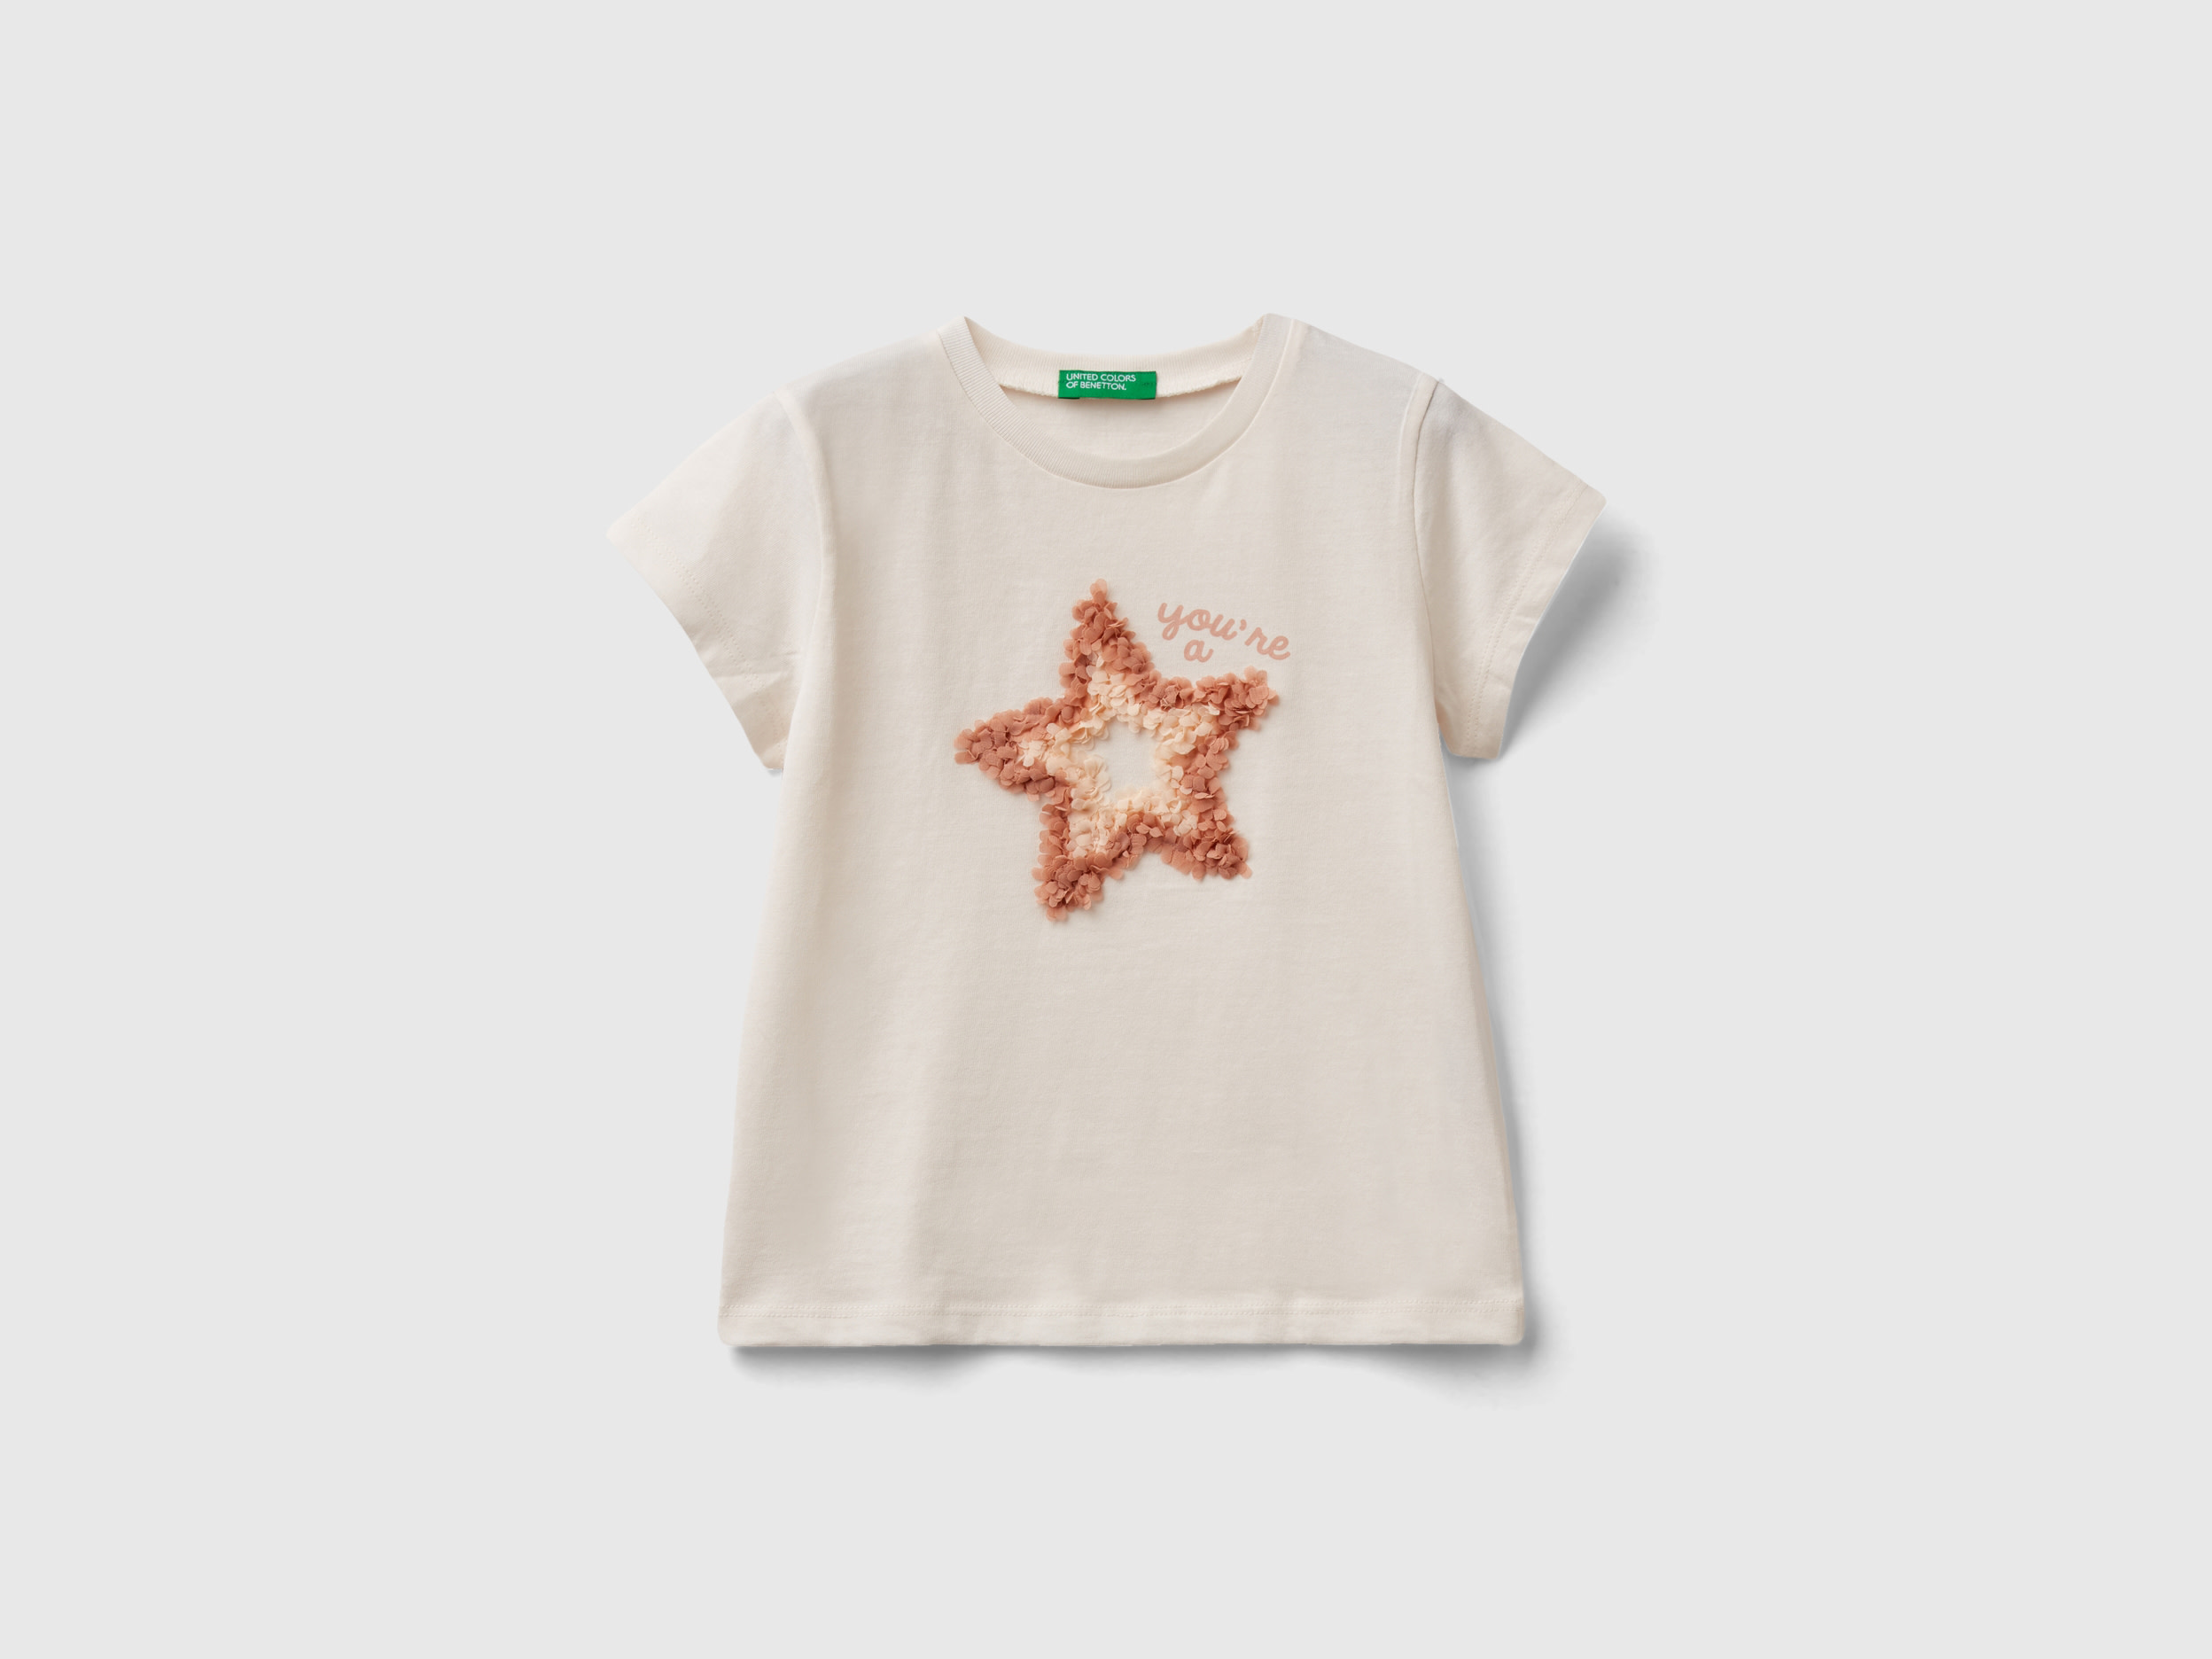 Image of Benetton, T-shirt With Petal Effect Applique, size 98, Creamy White, Kids